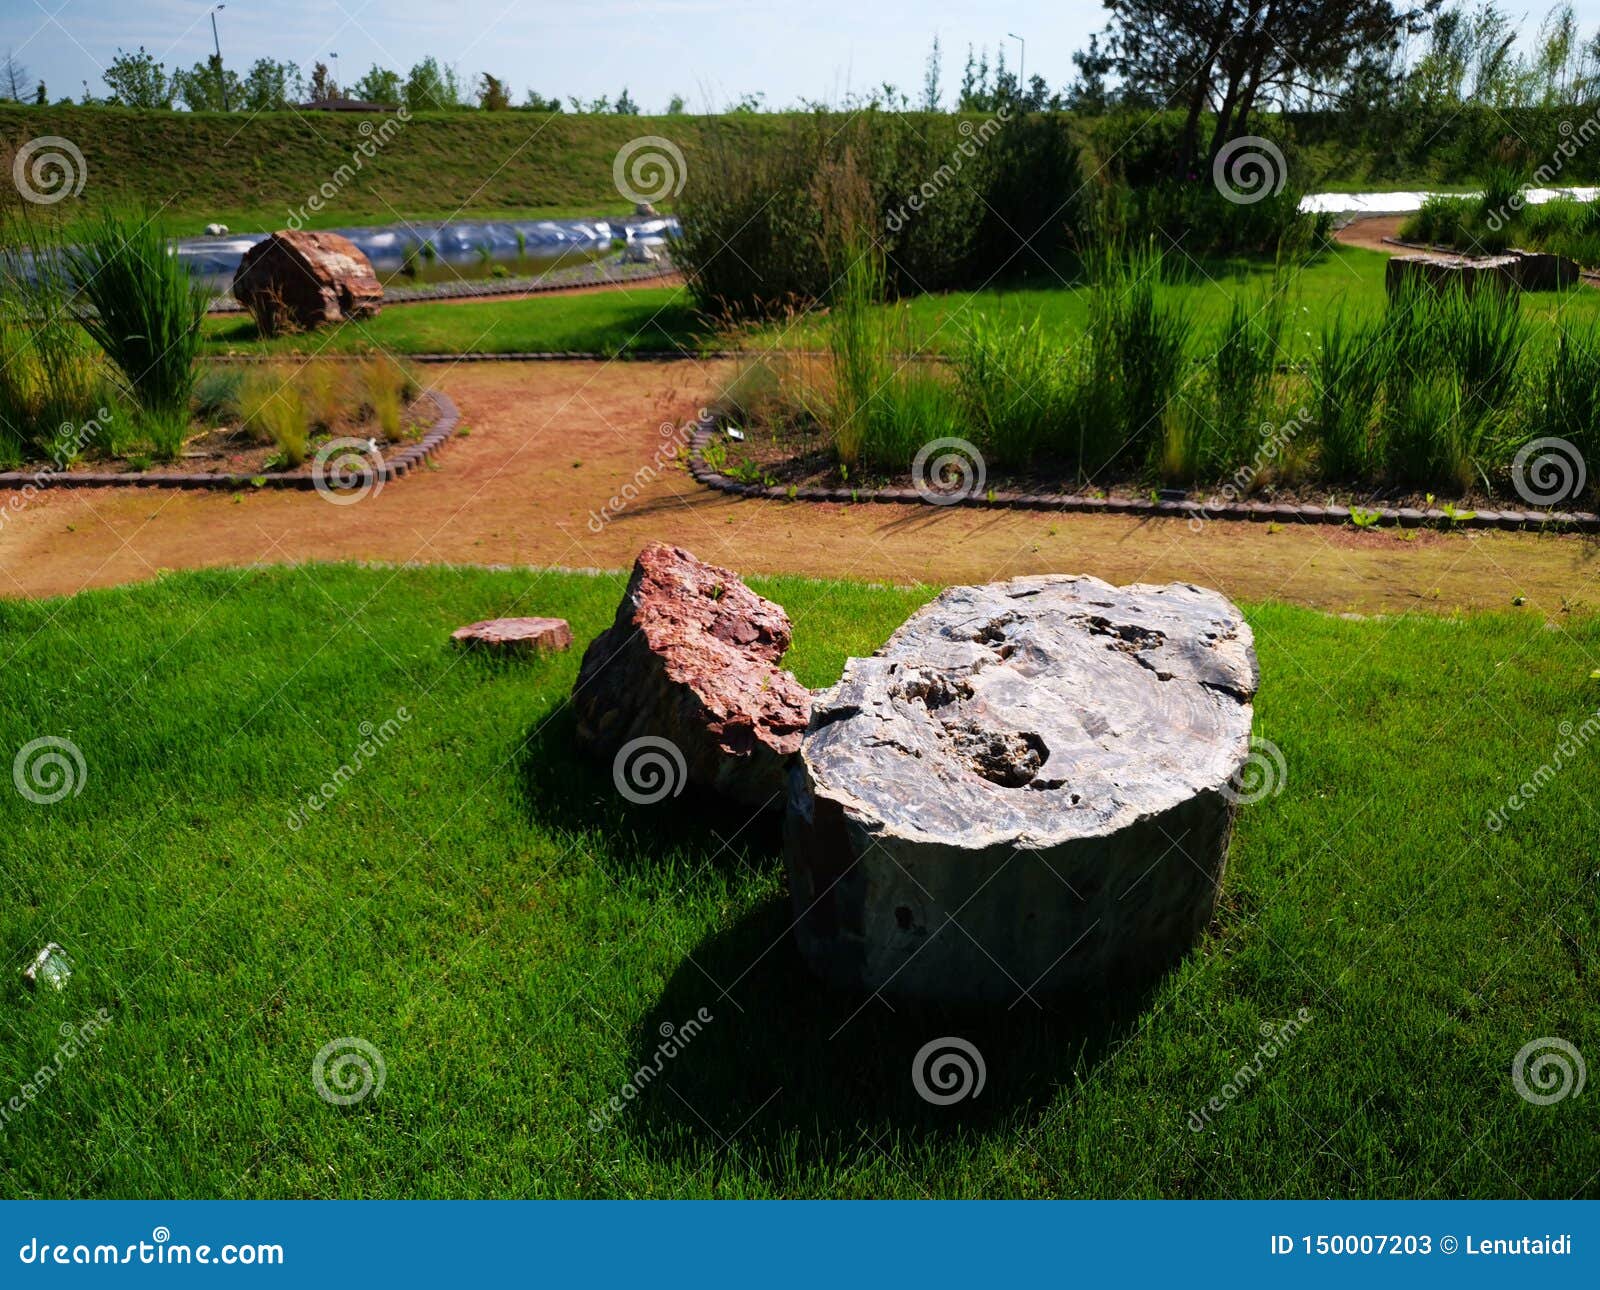 Garden With Decorative Stones Near A Lake Stock Image Image Of